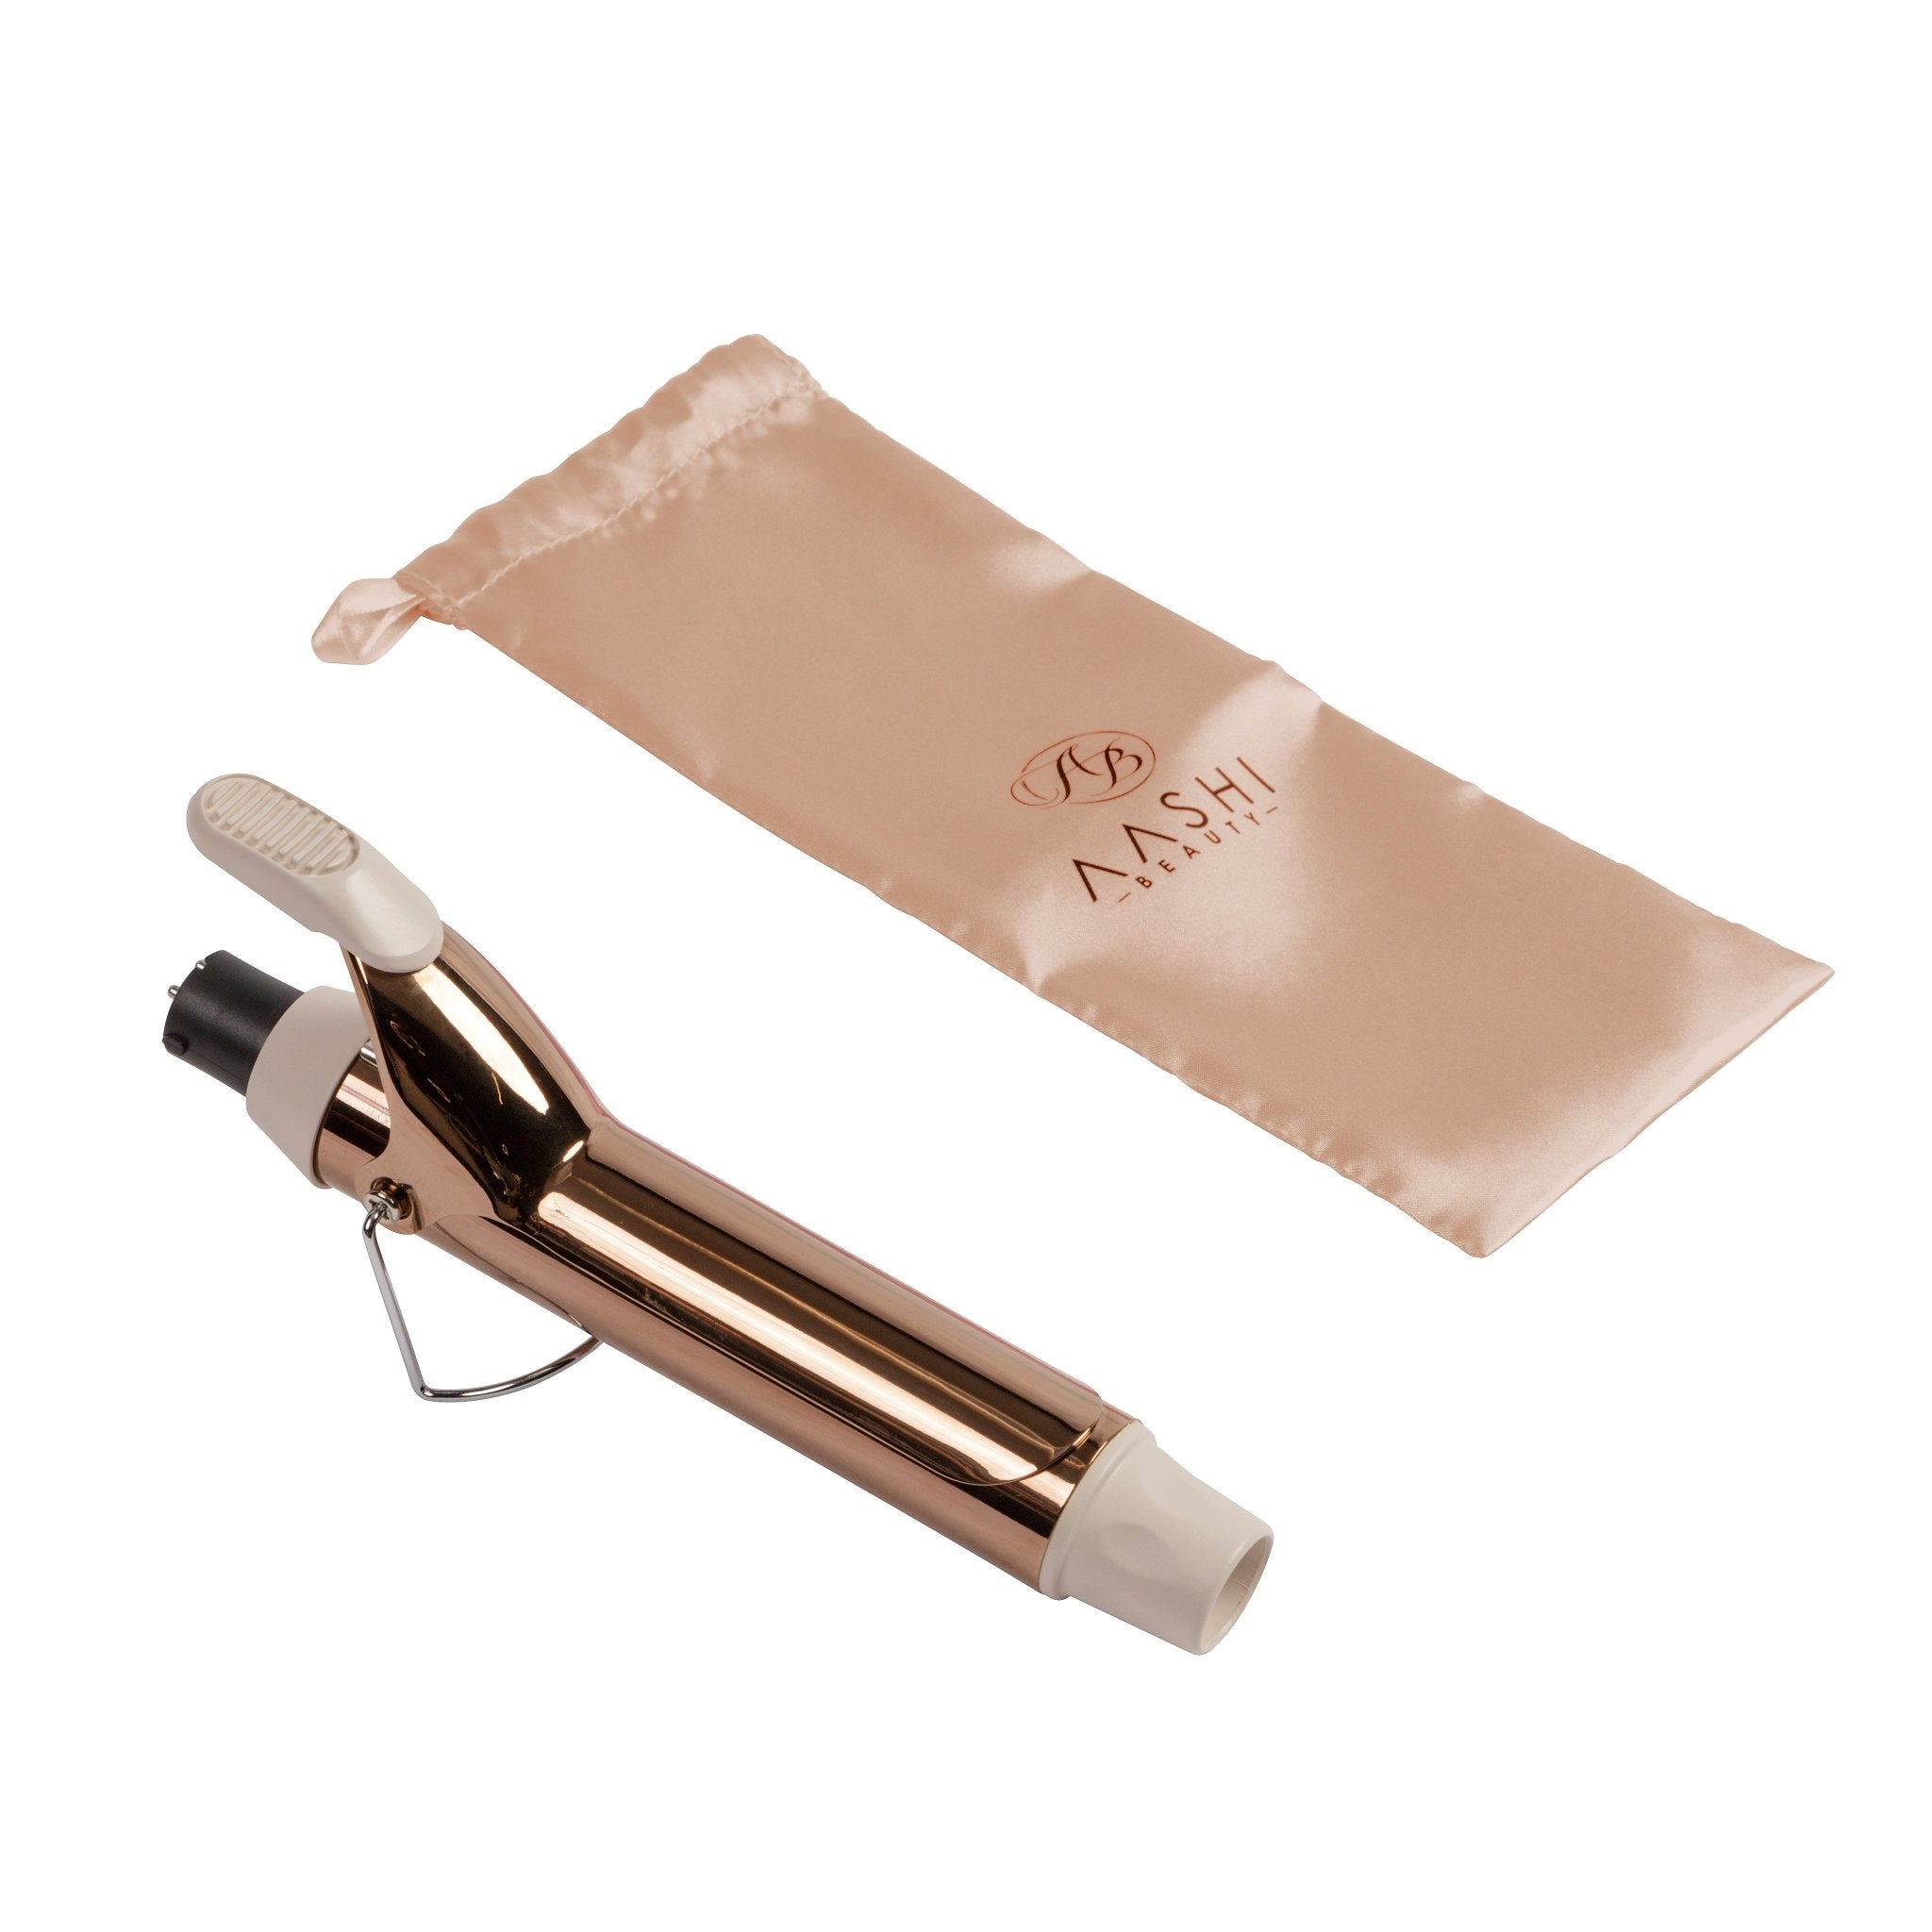 3 in 1 Titanium Curler, 38mm, 32mm & 25mm (1.5" 1.26" & 1") Clamp Curler - Aashi Beauty